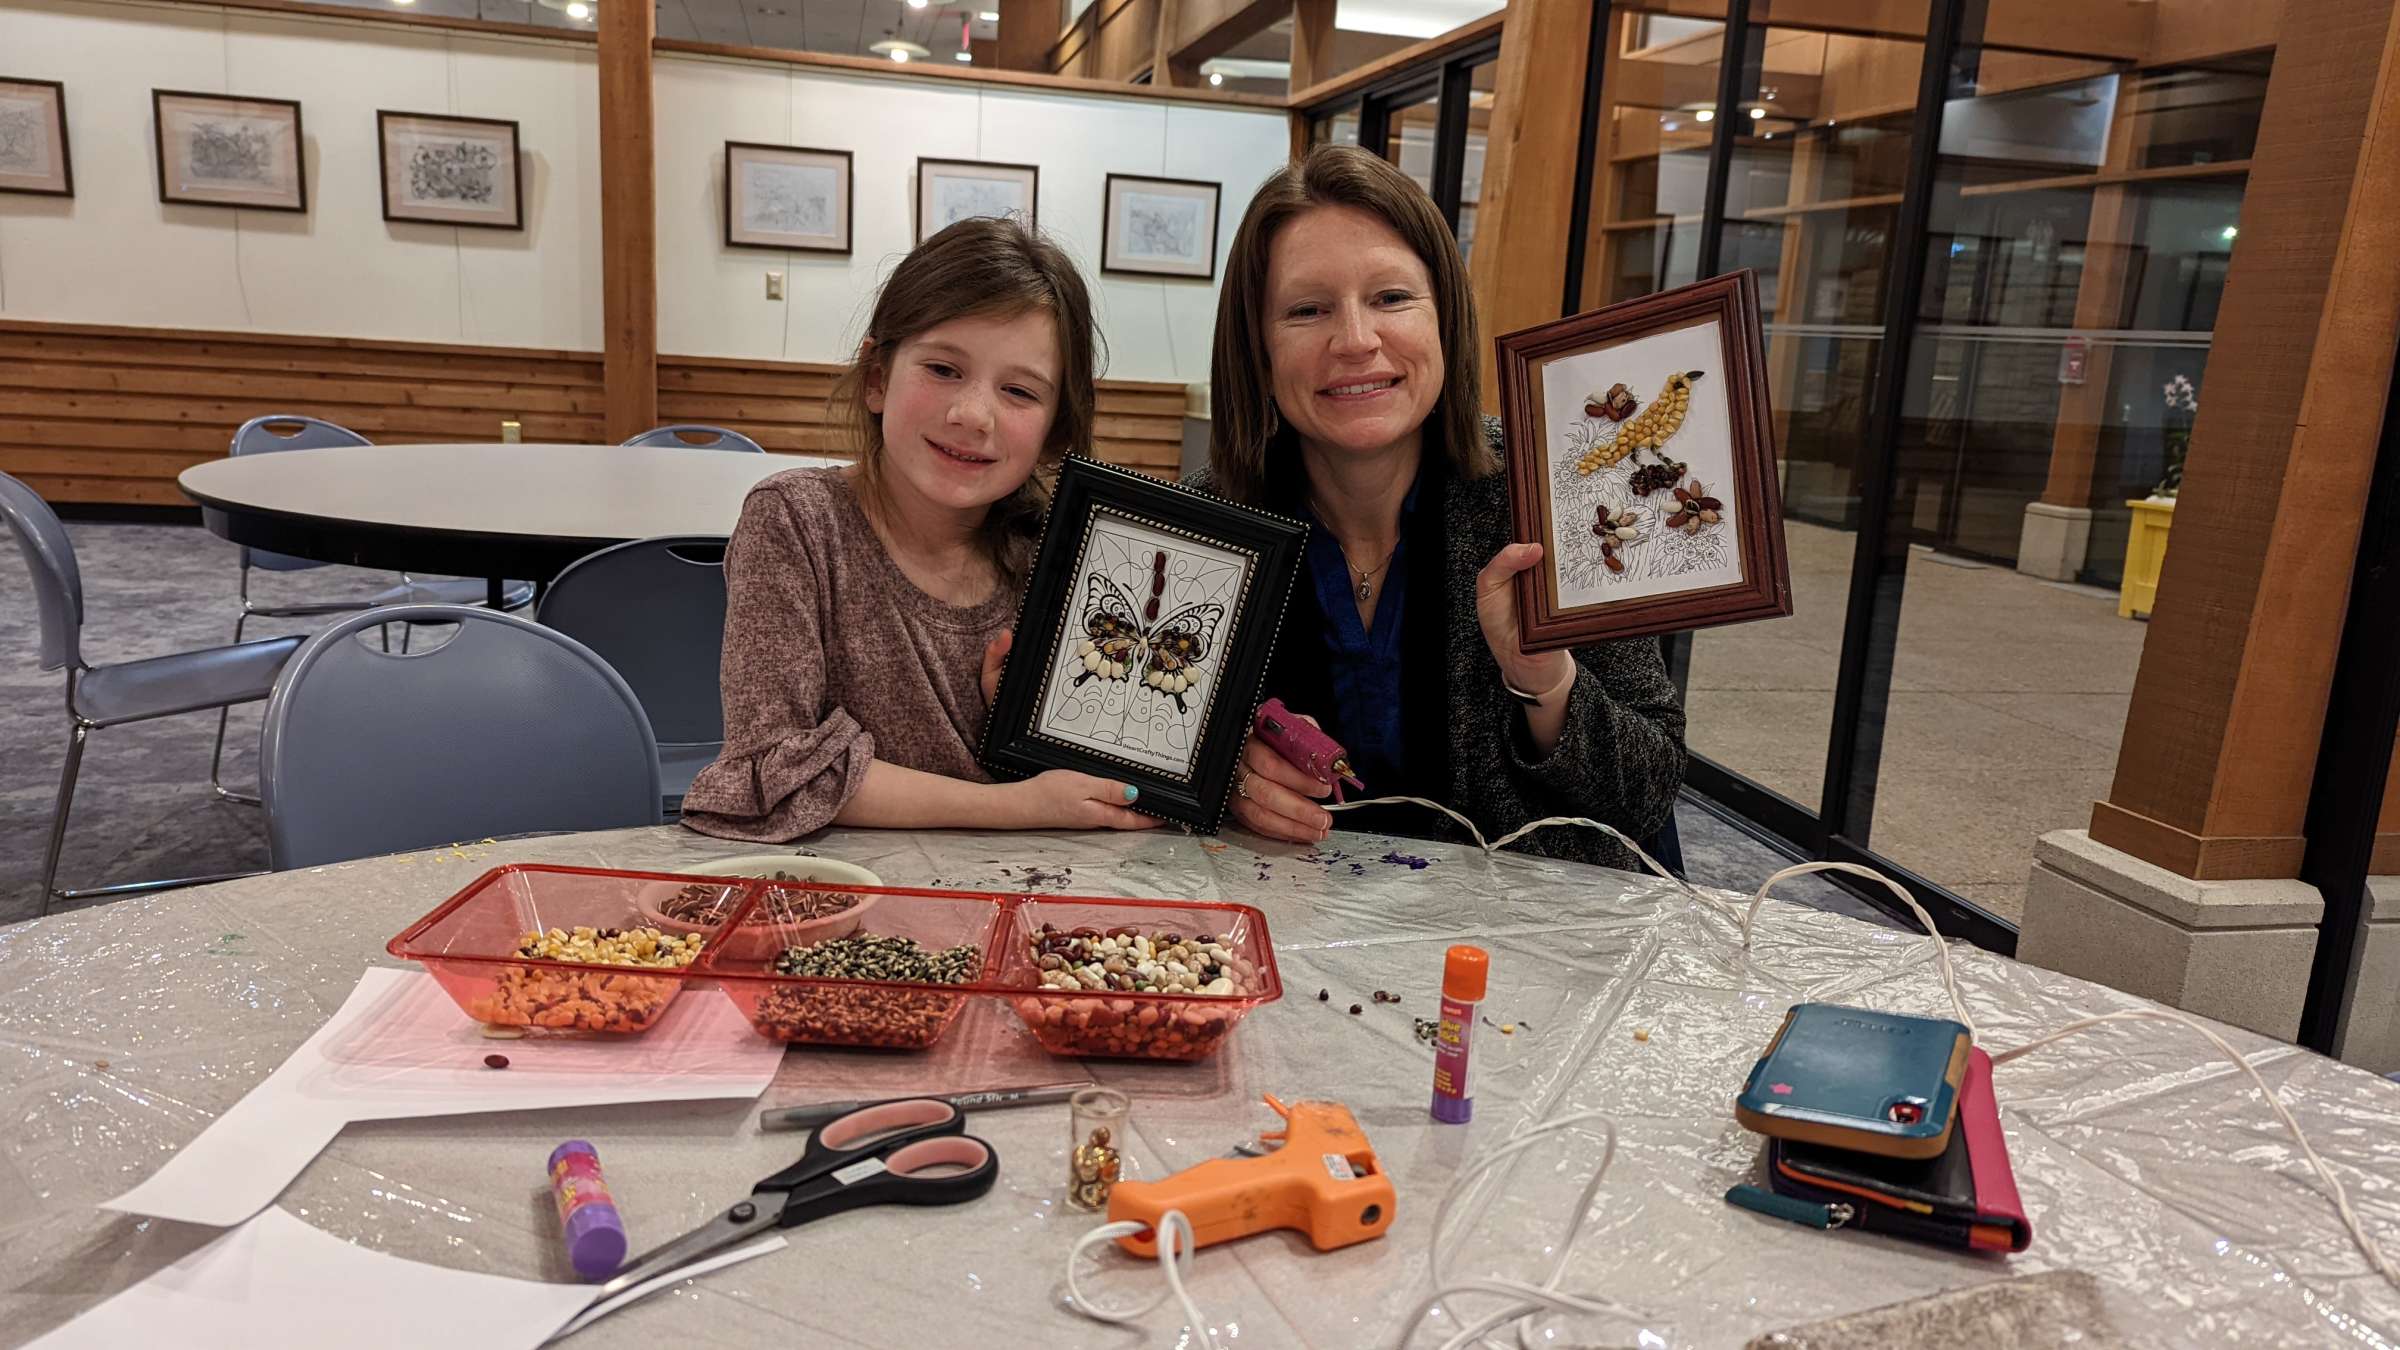 A m other and daughter show off the project made at a Reiman Gardens Maker Night.